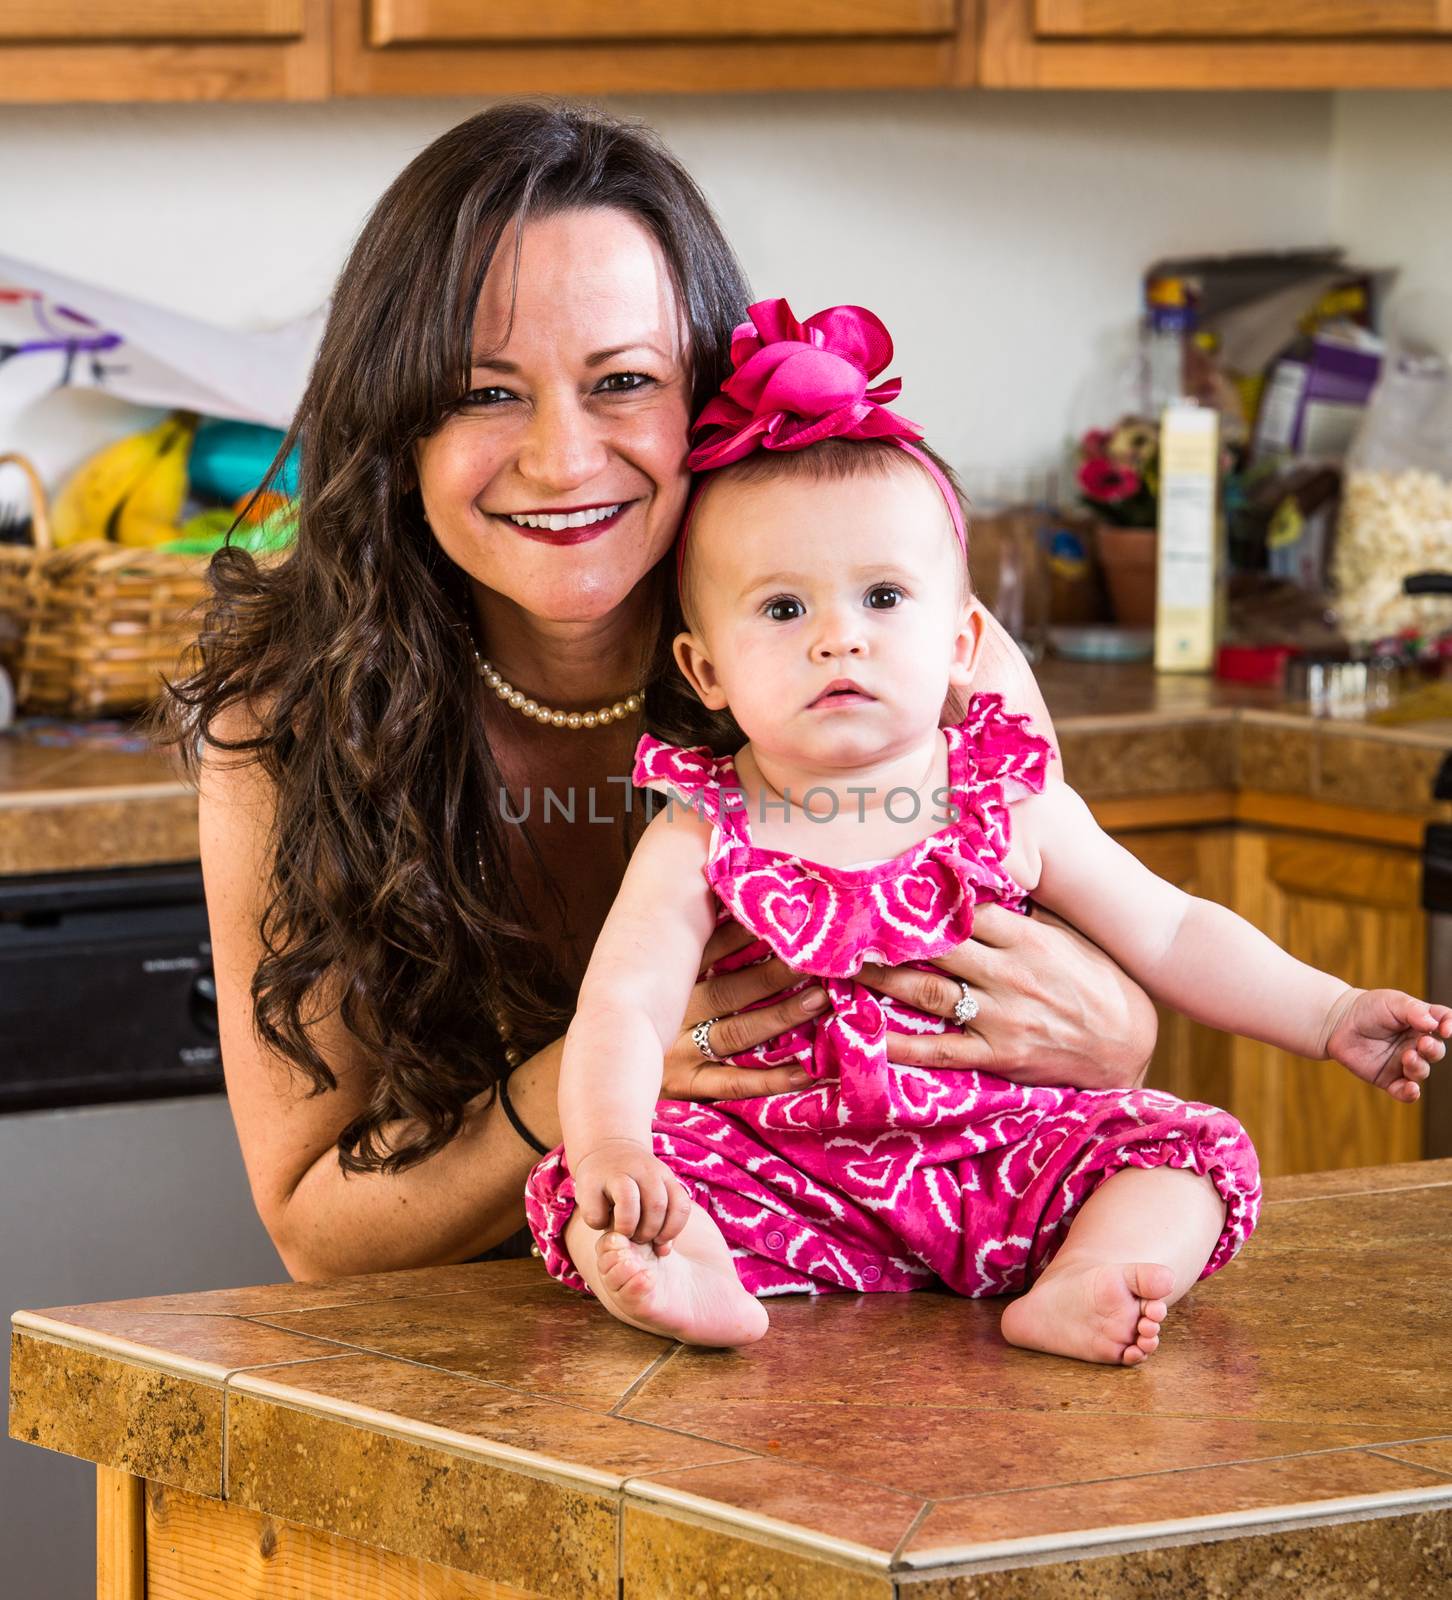 A mother in the kitchen poses with her baby